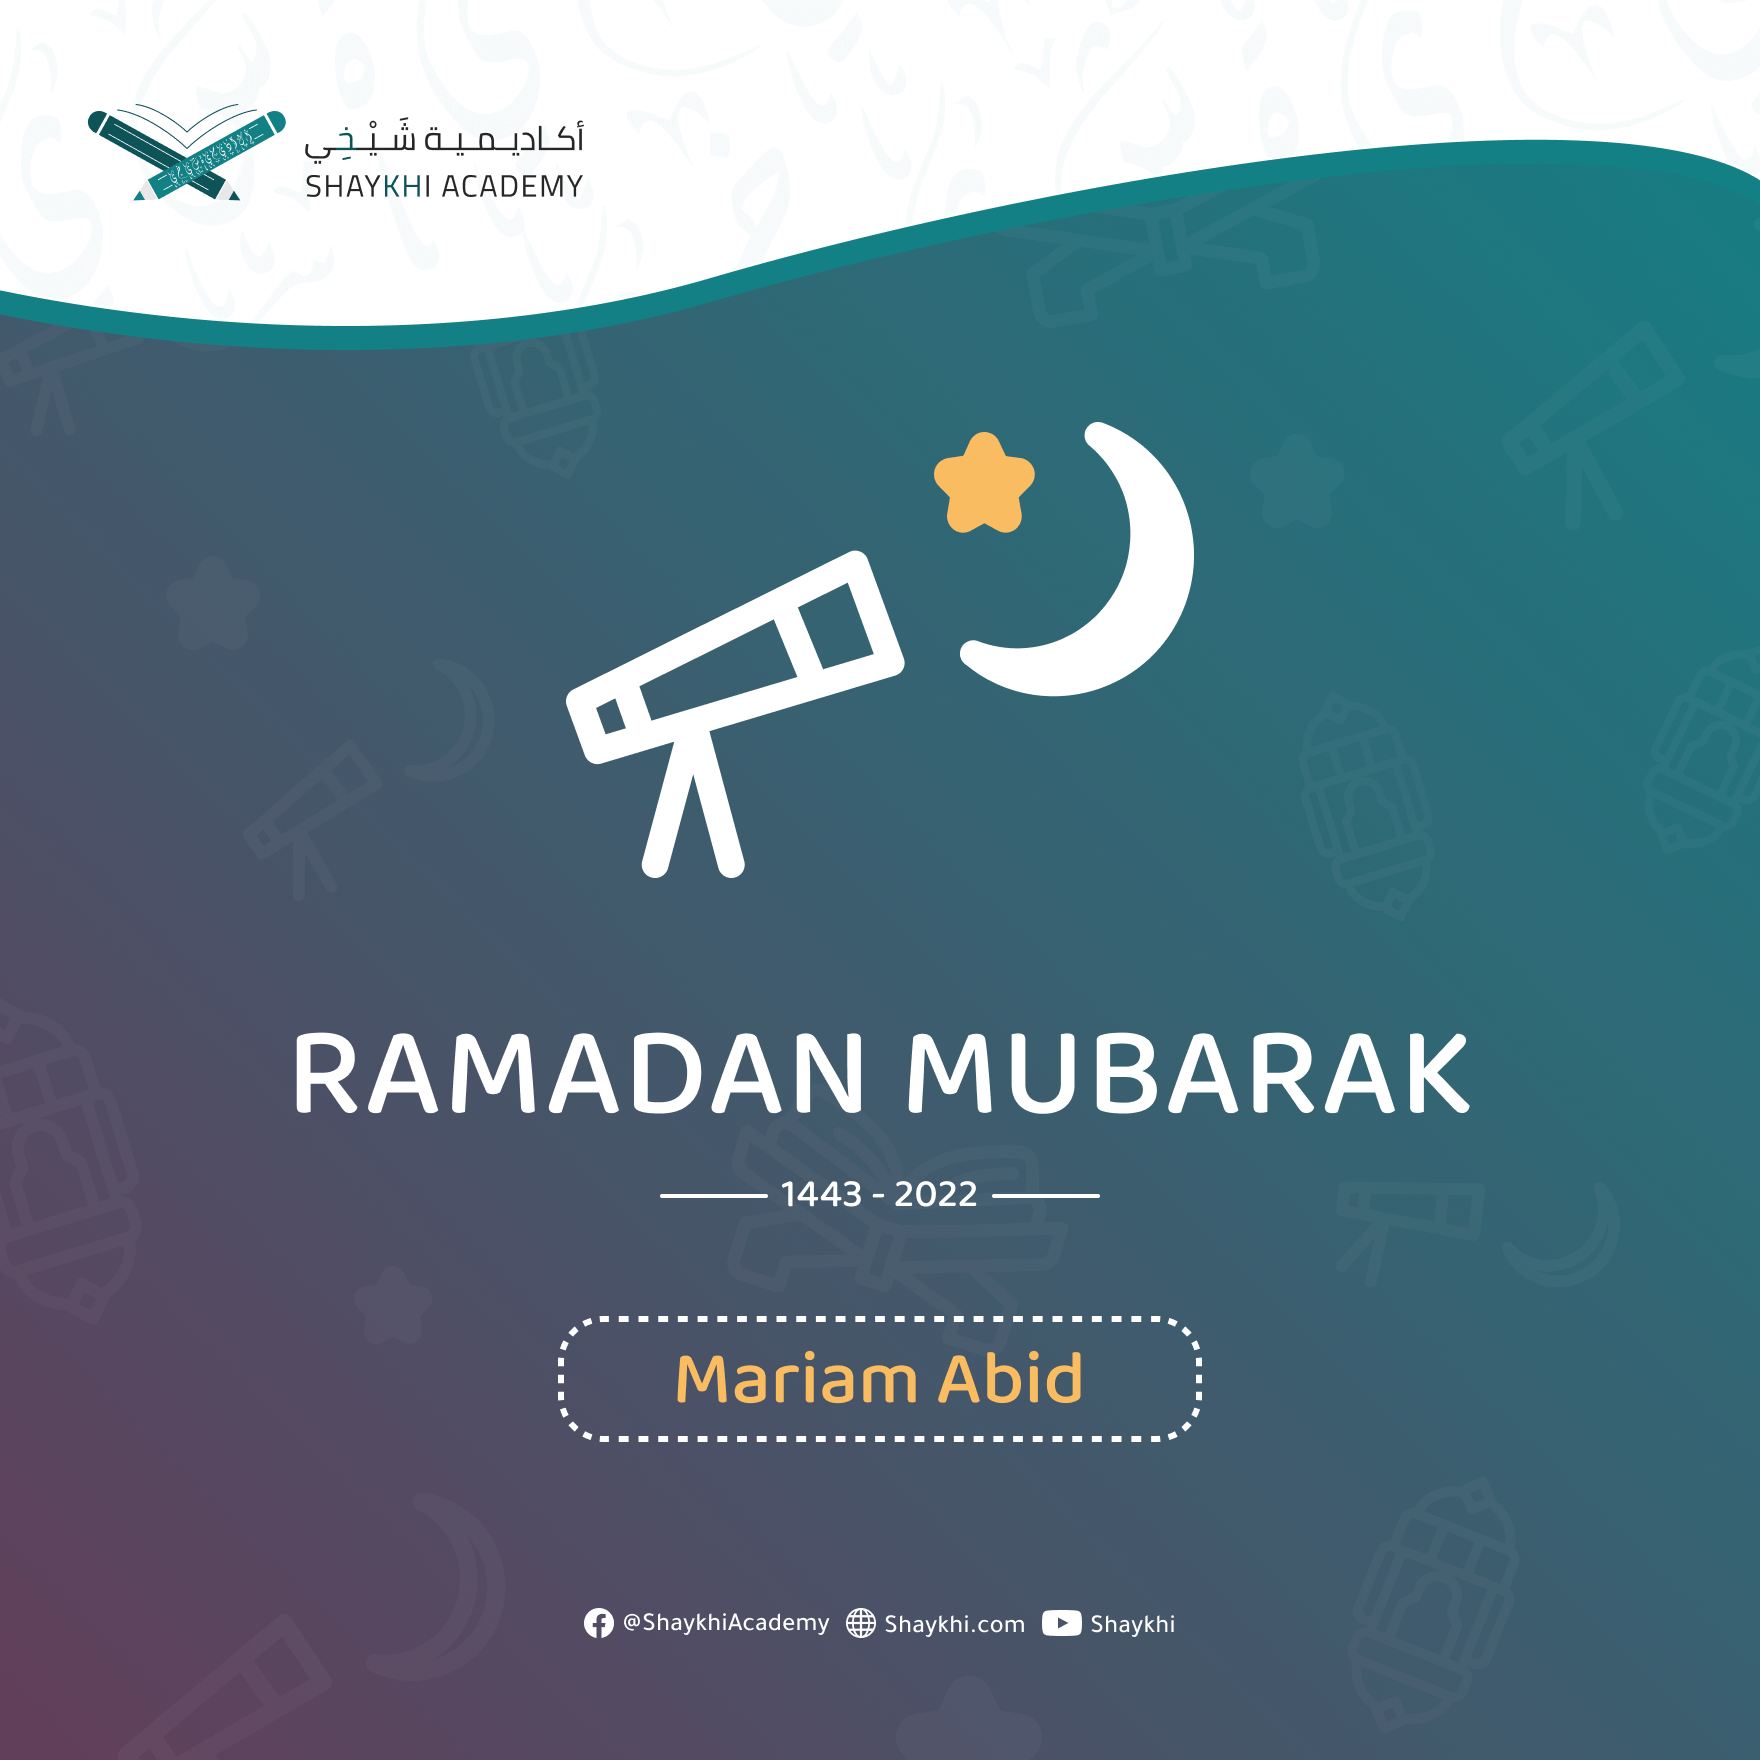 Ramadan Mubarak Images and Meaning - cards for Quran Students 10 Kids and teenagers